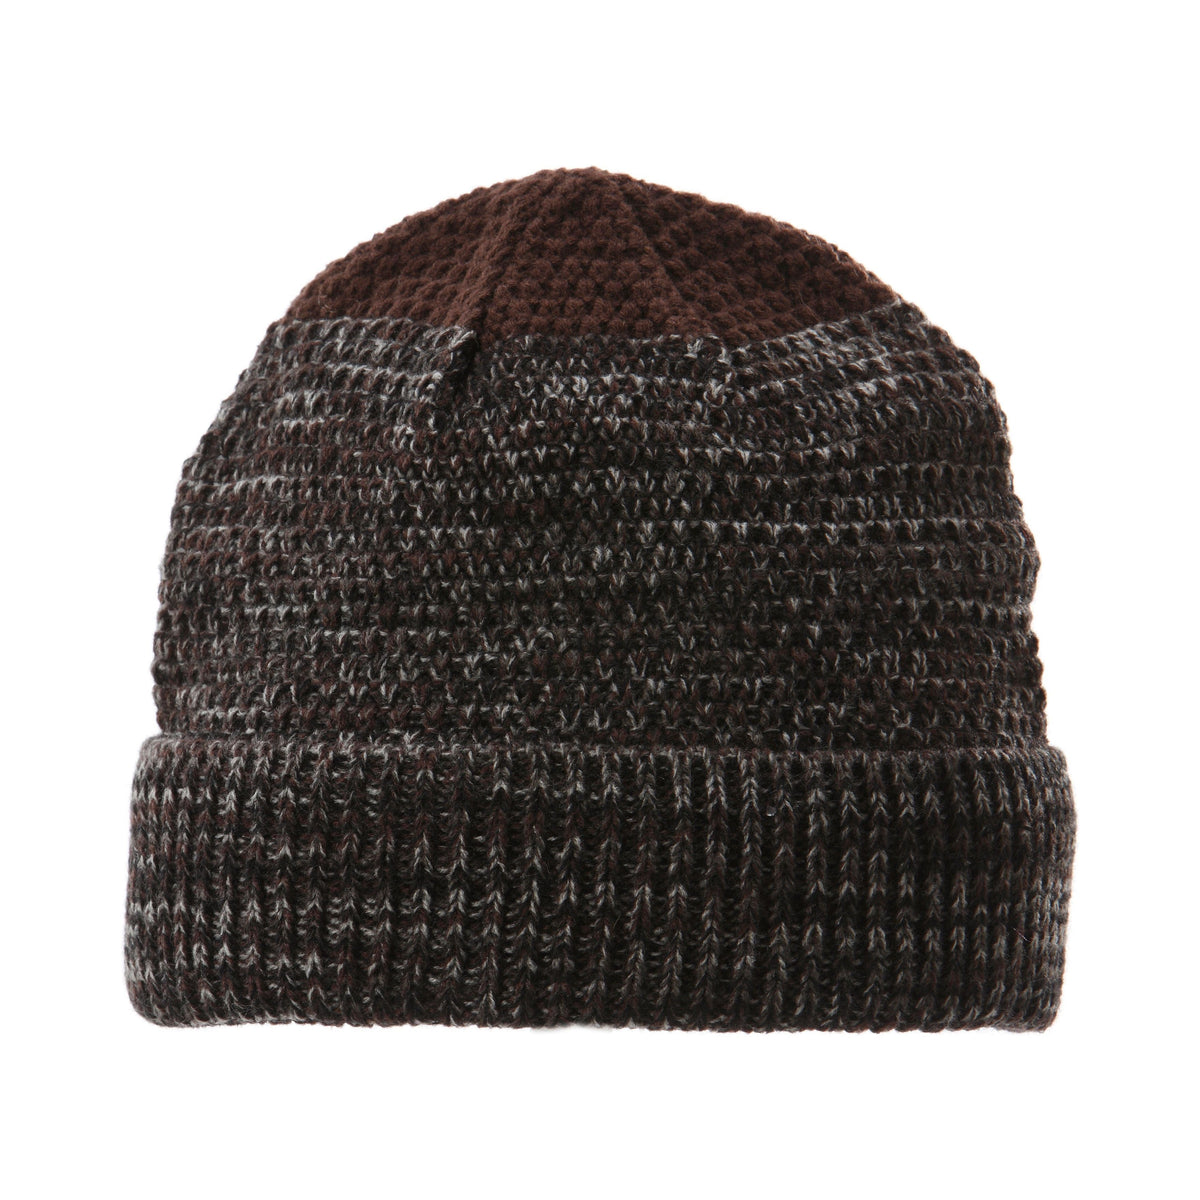 use - – Gear for beanie super made Graham long-lasting comfy Screamer A